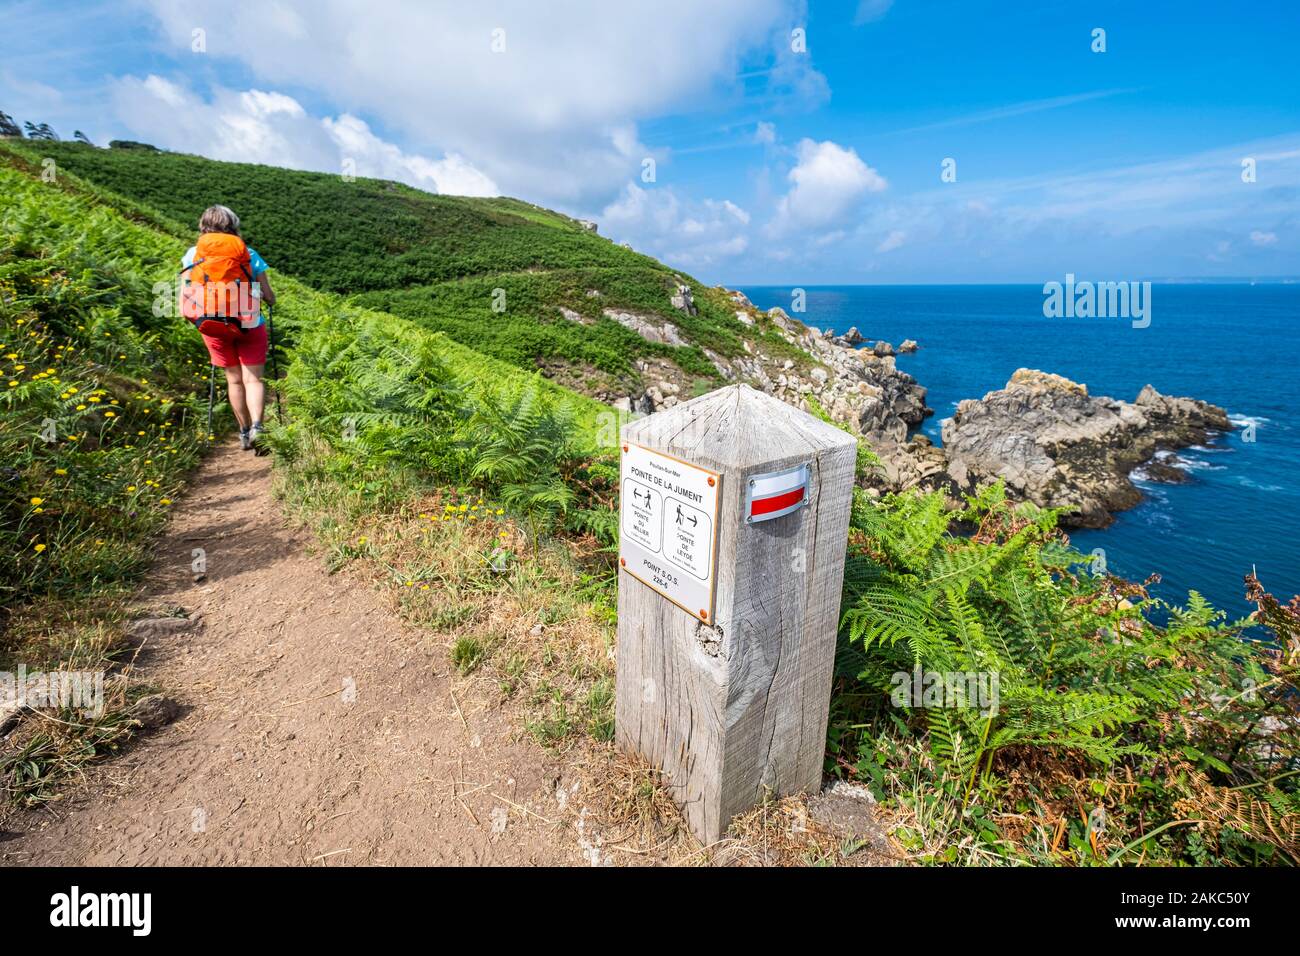 France, Finistere, Poullan-sur-Mer, Pointe de la Jument on the GR 34 hiking trail or customs trail Stock Photo